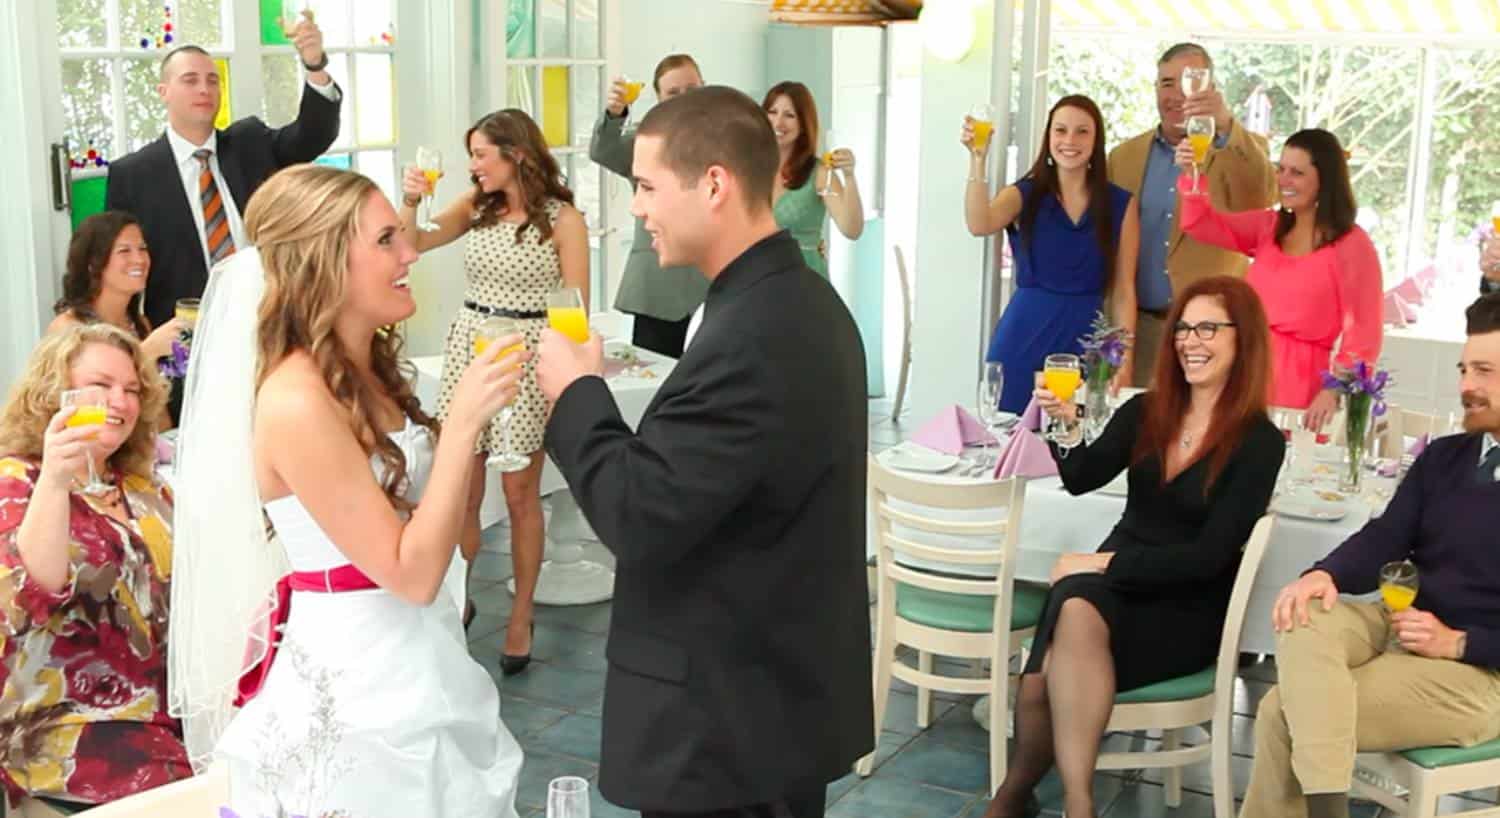 Bride and groom smiling and toasting each other with people in the background raising their glasses